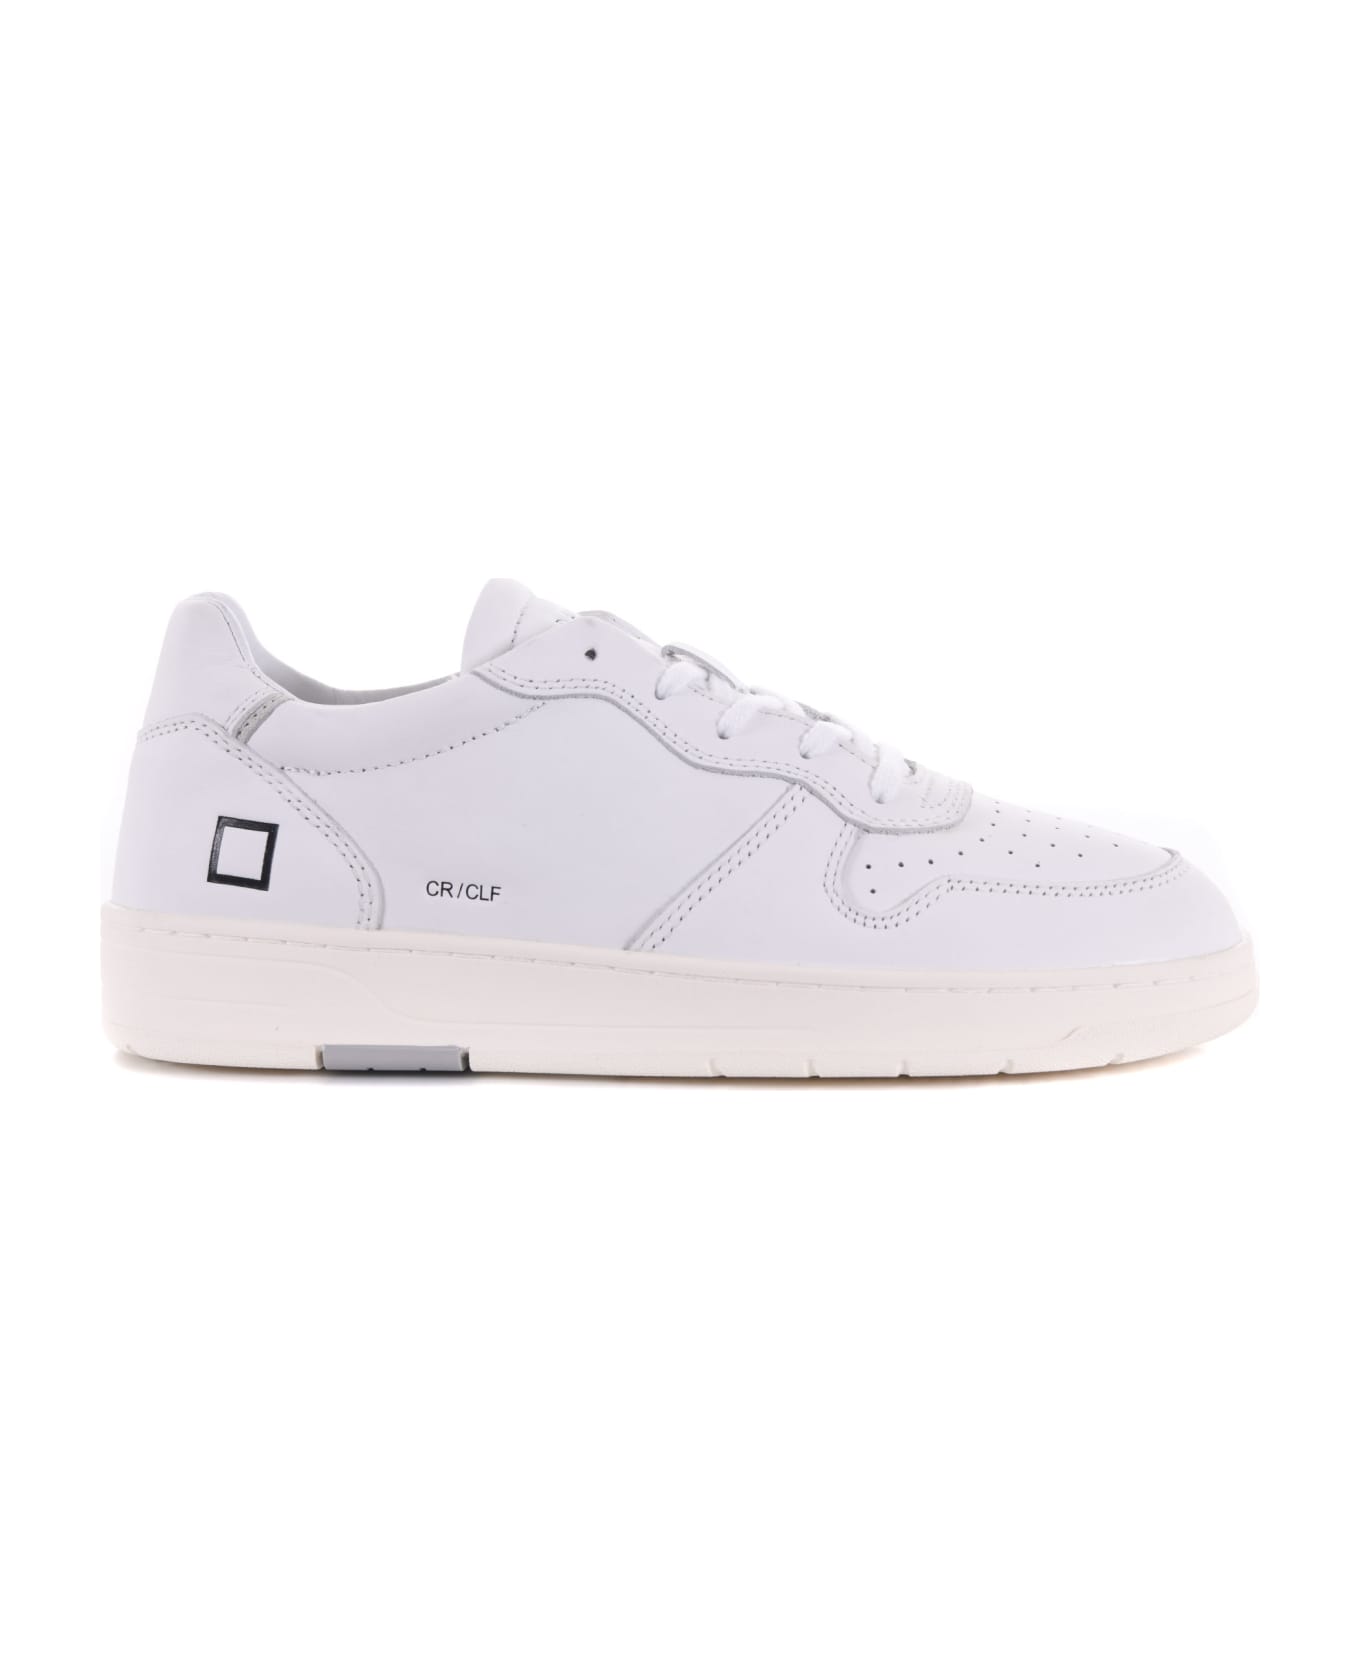 D.A.T.E. Sneakers "court Calf" Leather - Bianco スニーカー